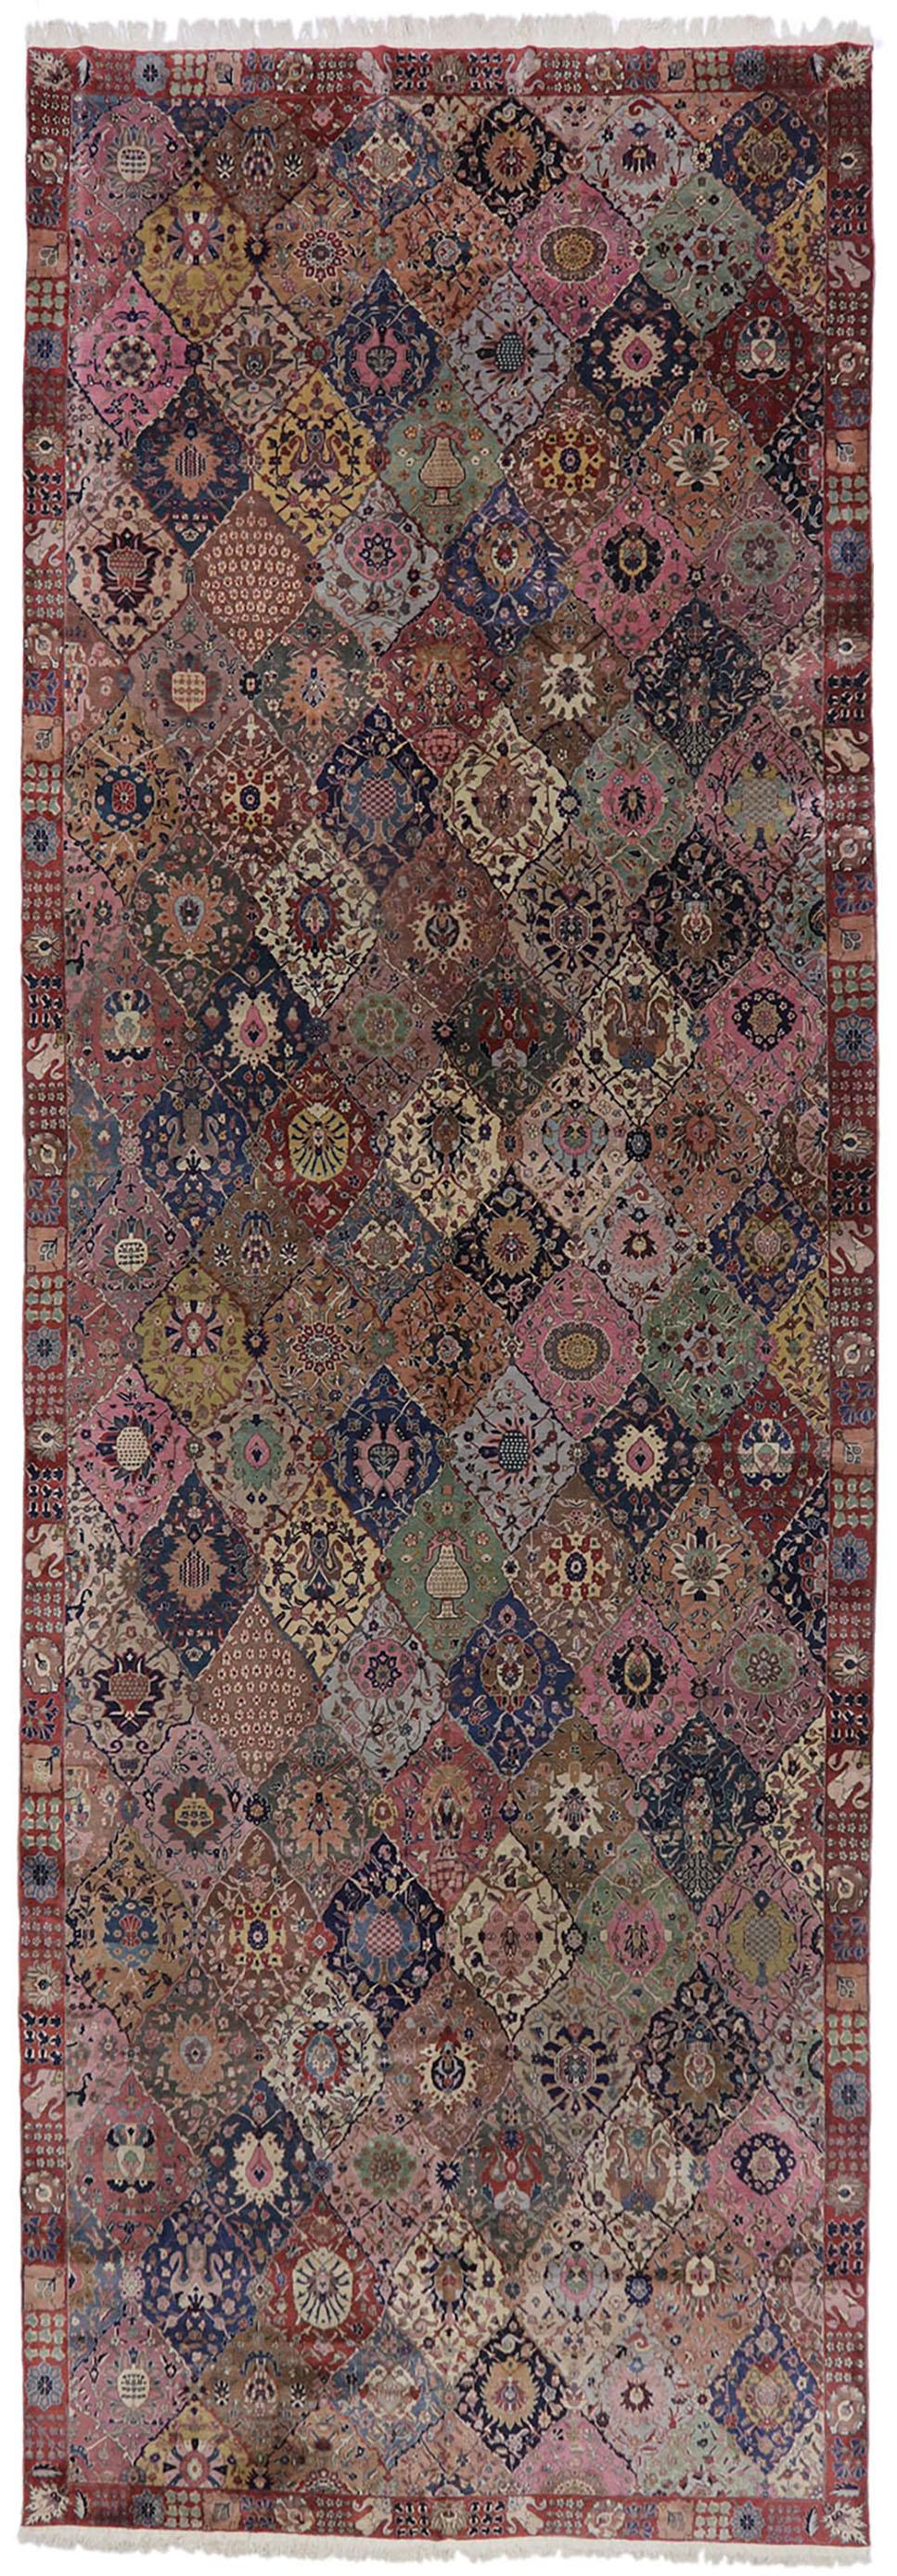 Antique Indian Agra Rug with Garden Panel Design, Hotel Lobby Size Carpet For Sale 2